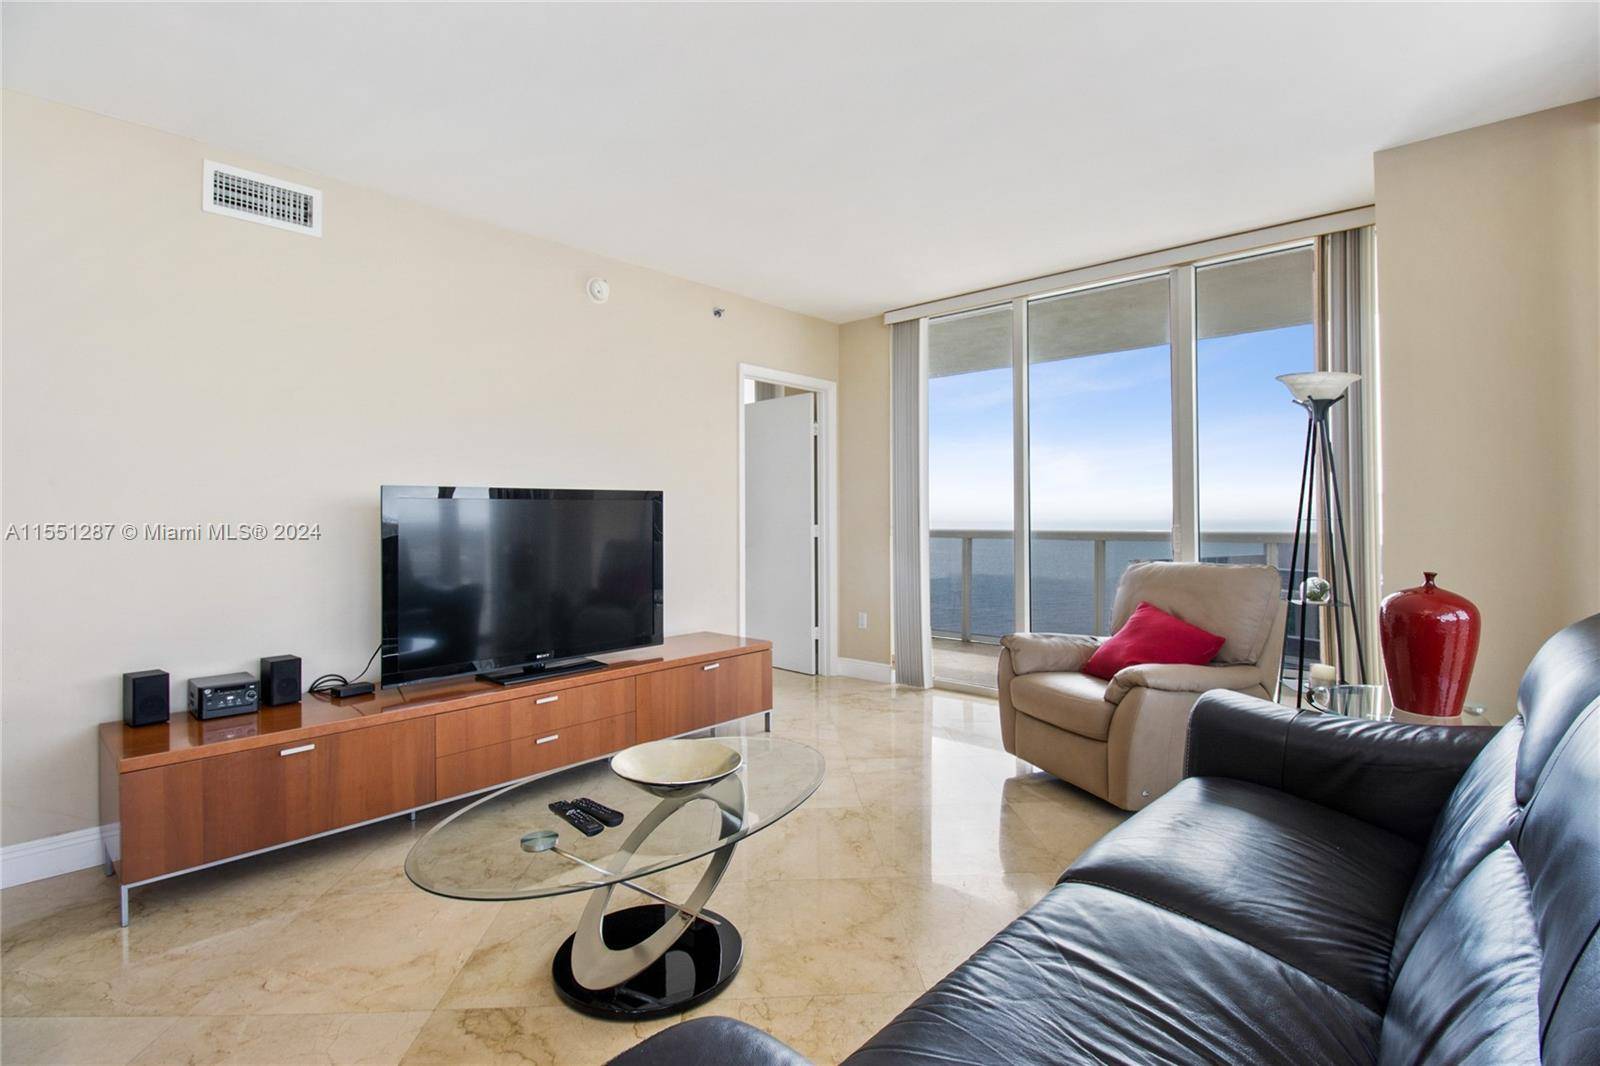 Enjoy stunning views of both the ocean and Intracoastal from this luxurious unit.